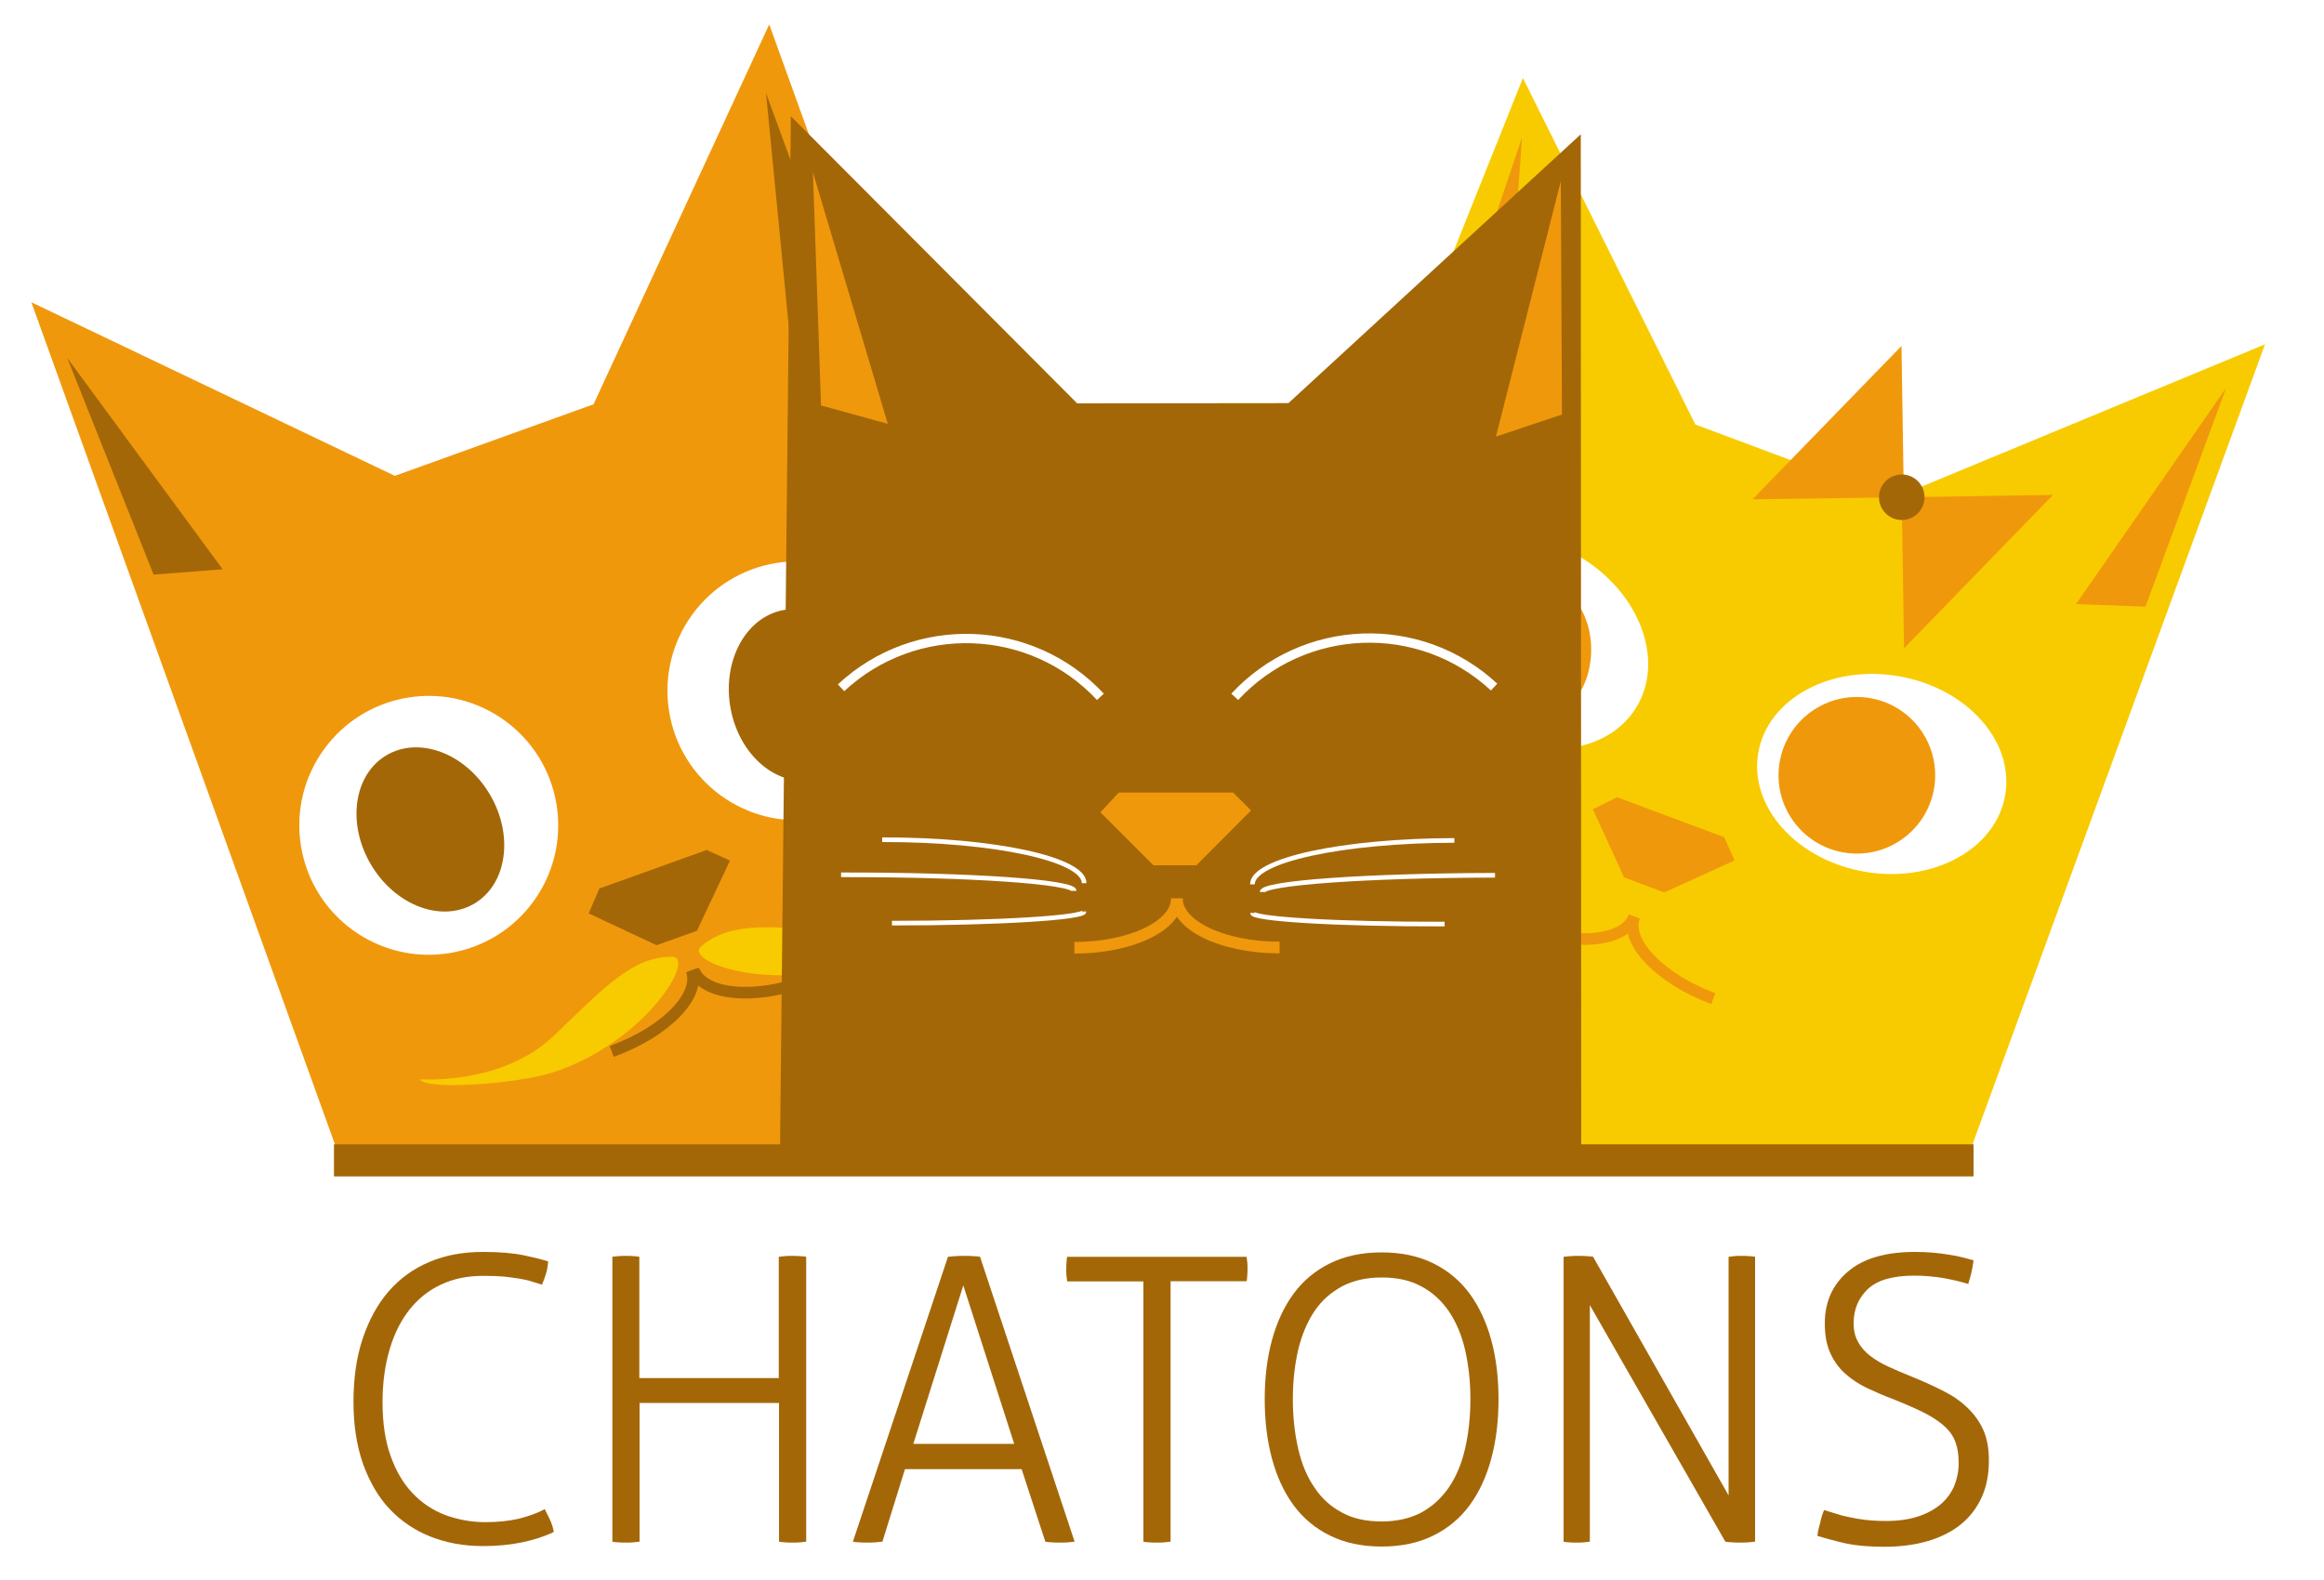 Kittens logo depicting 3 cat heads in yellow